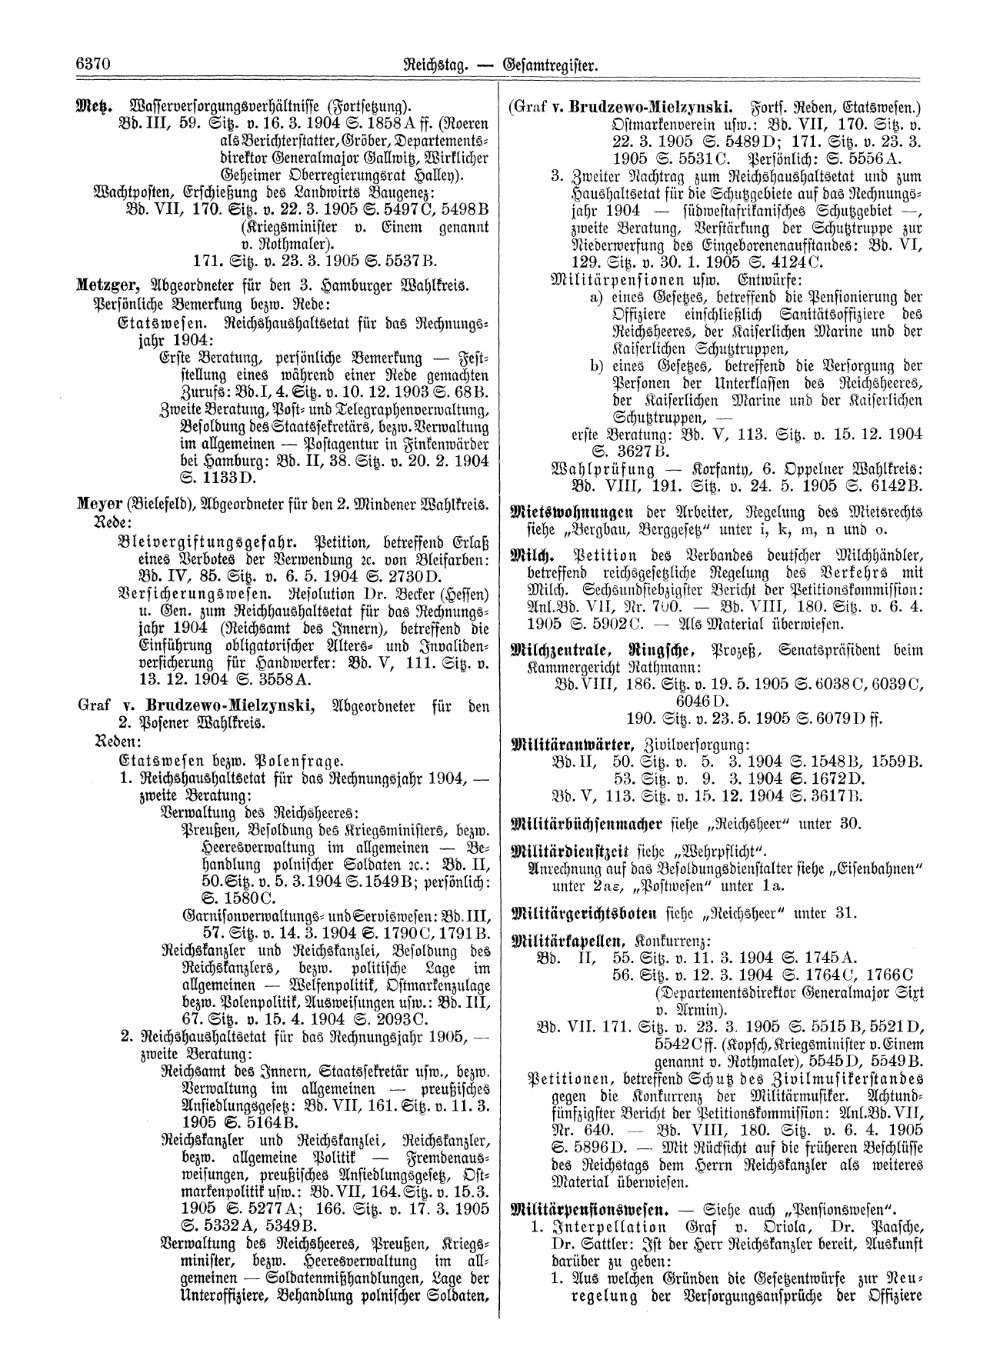 Scan of page 6370